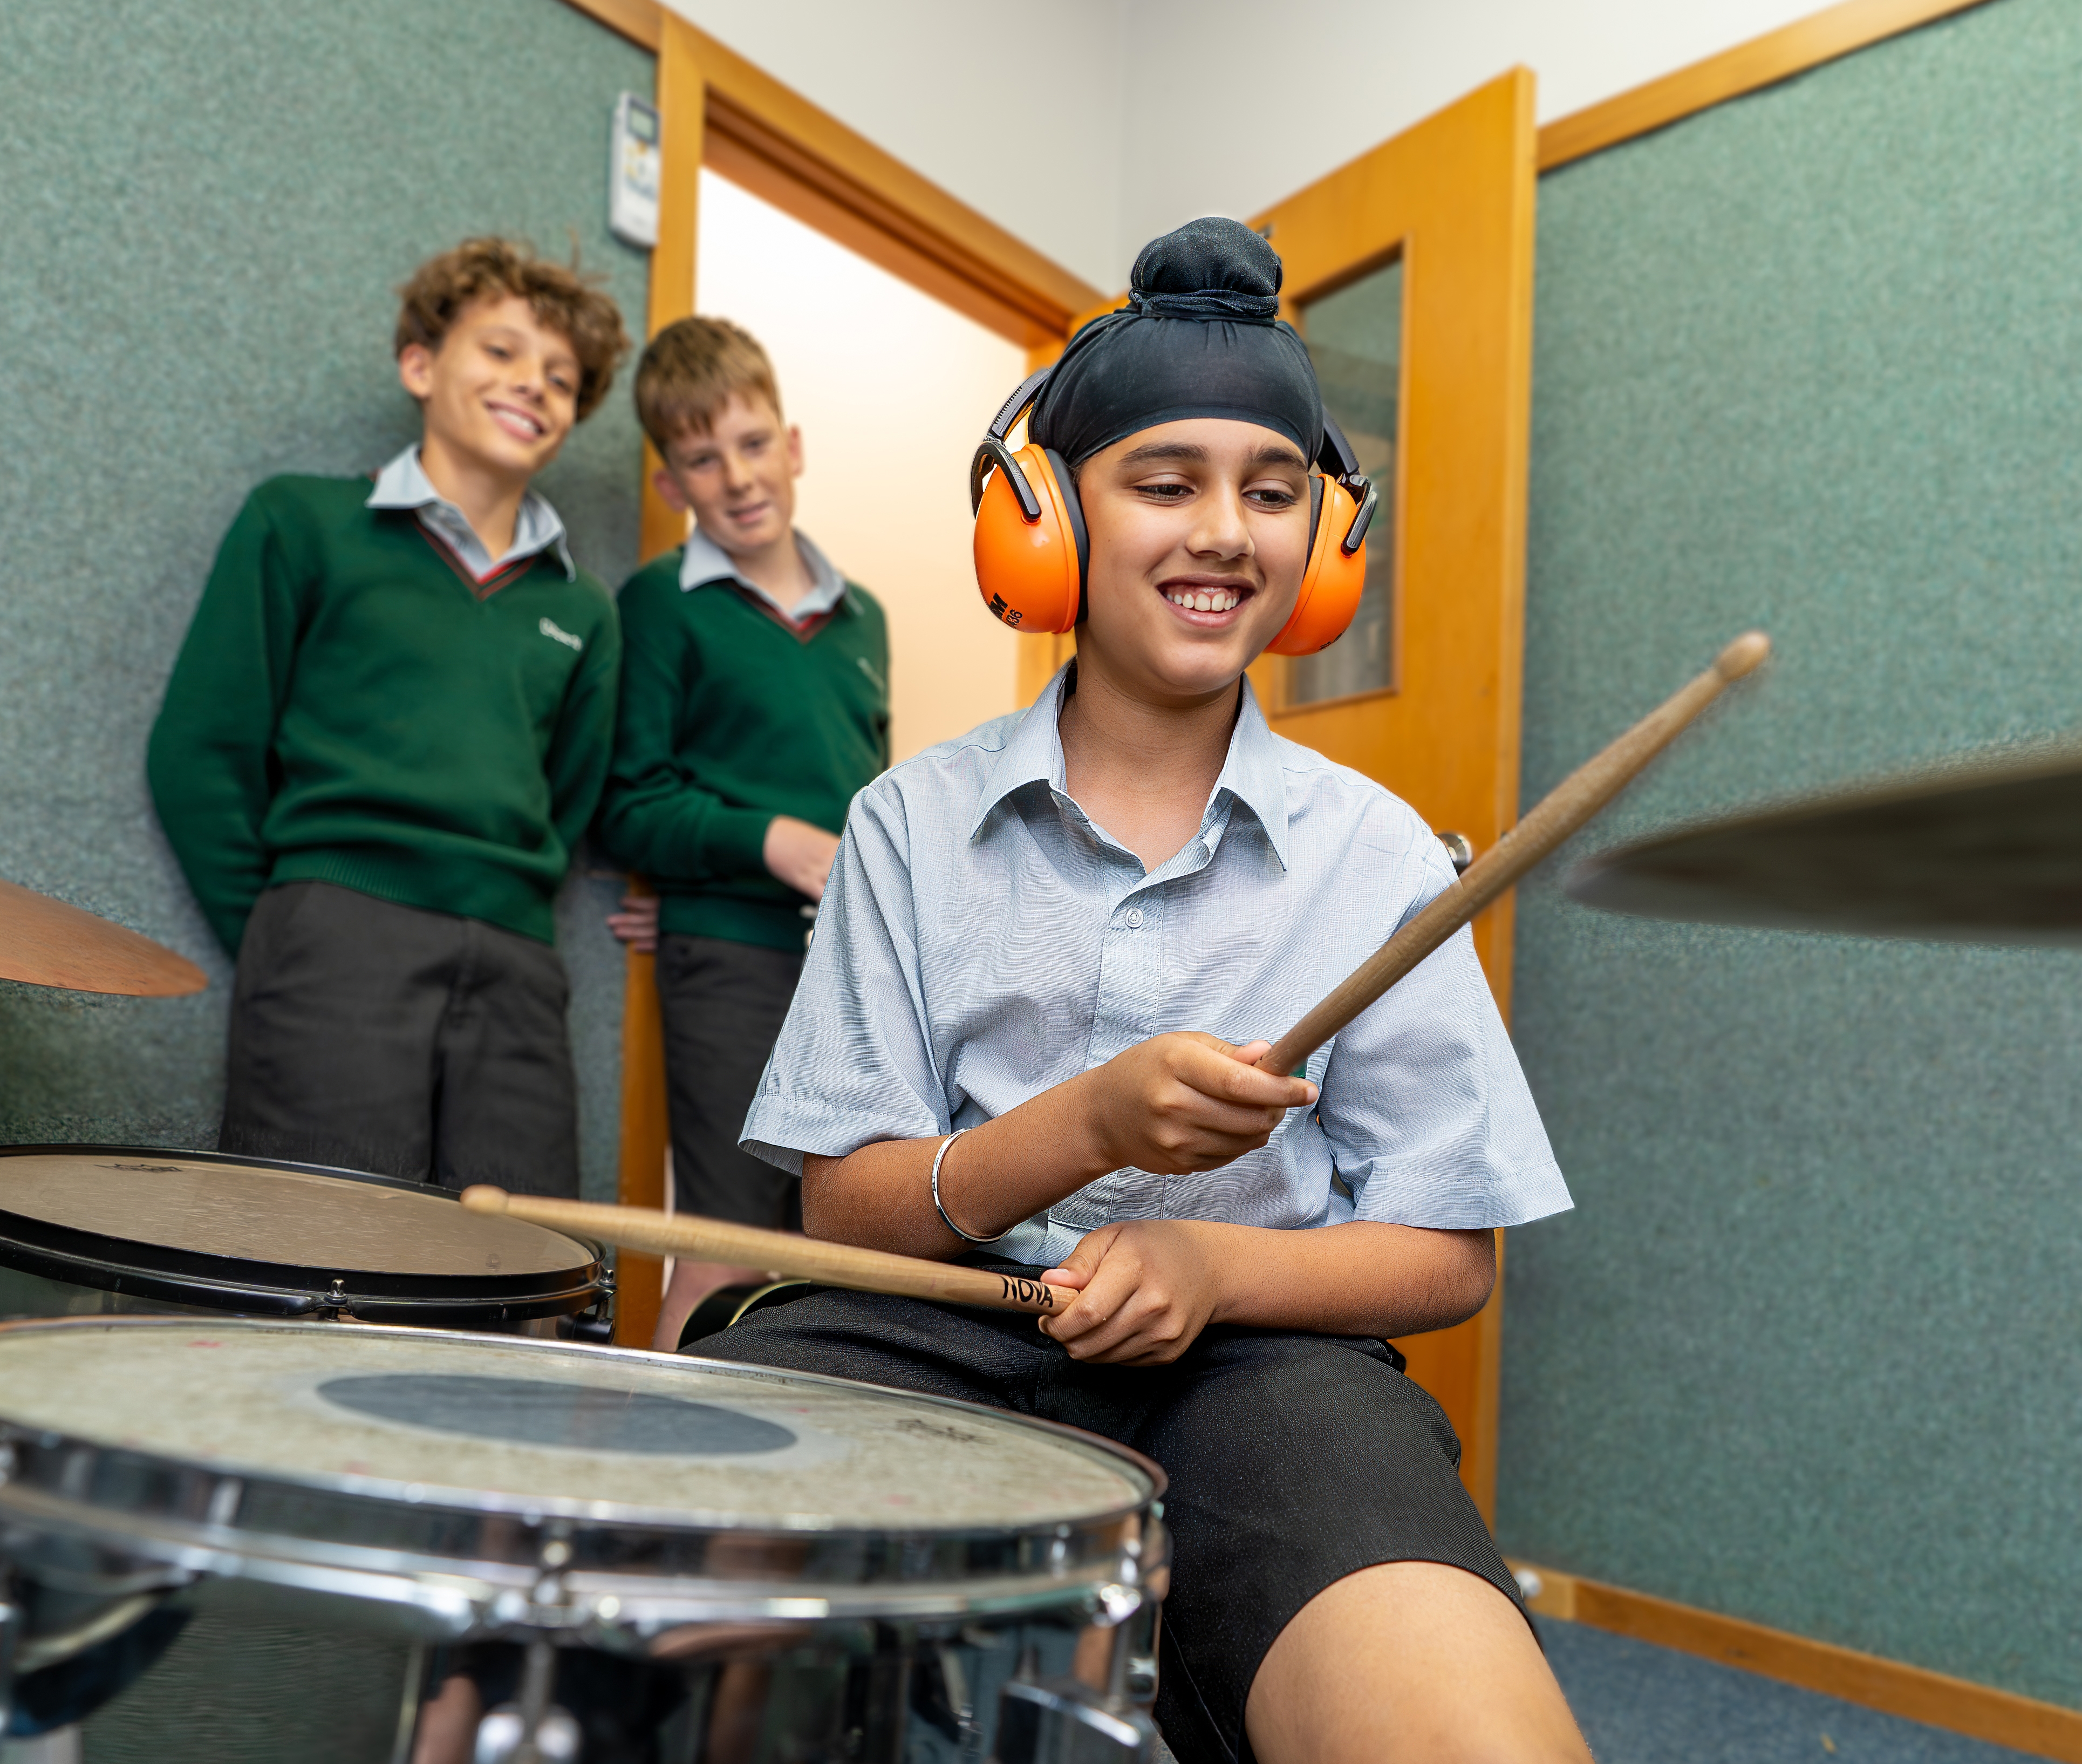 boy playing the drums in music class